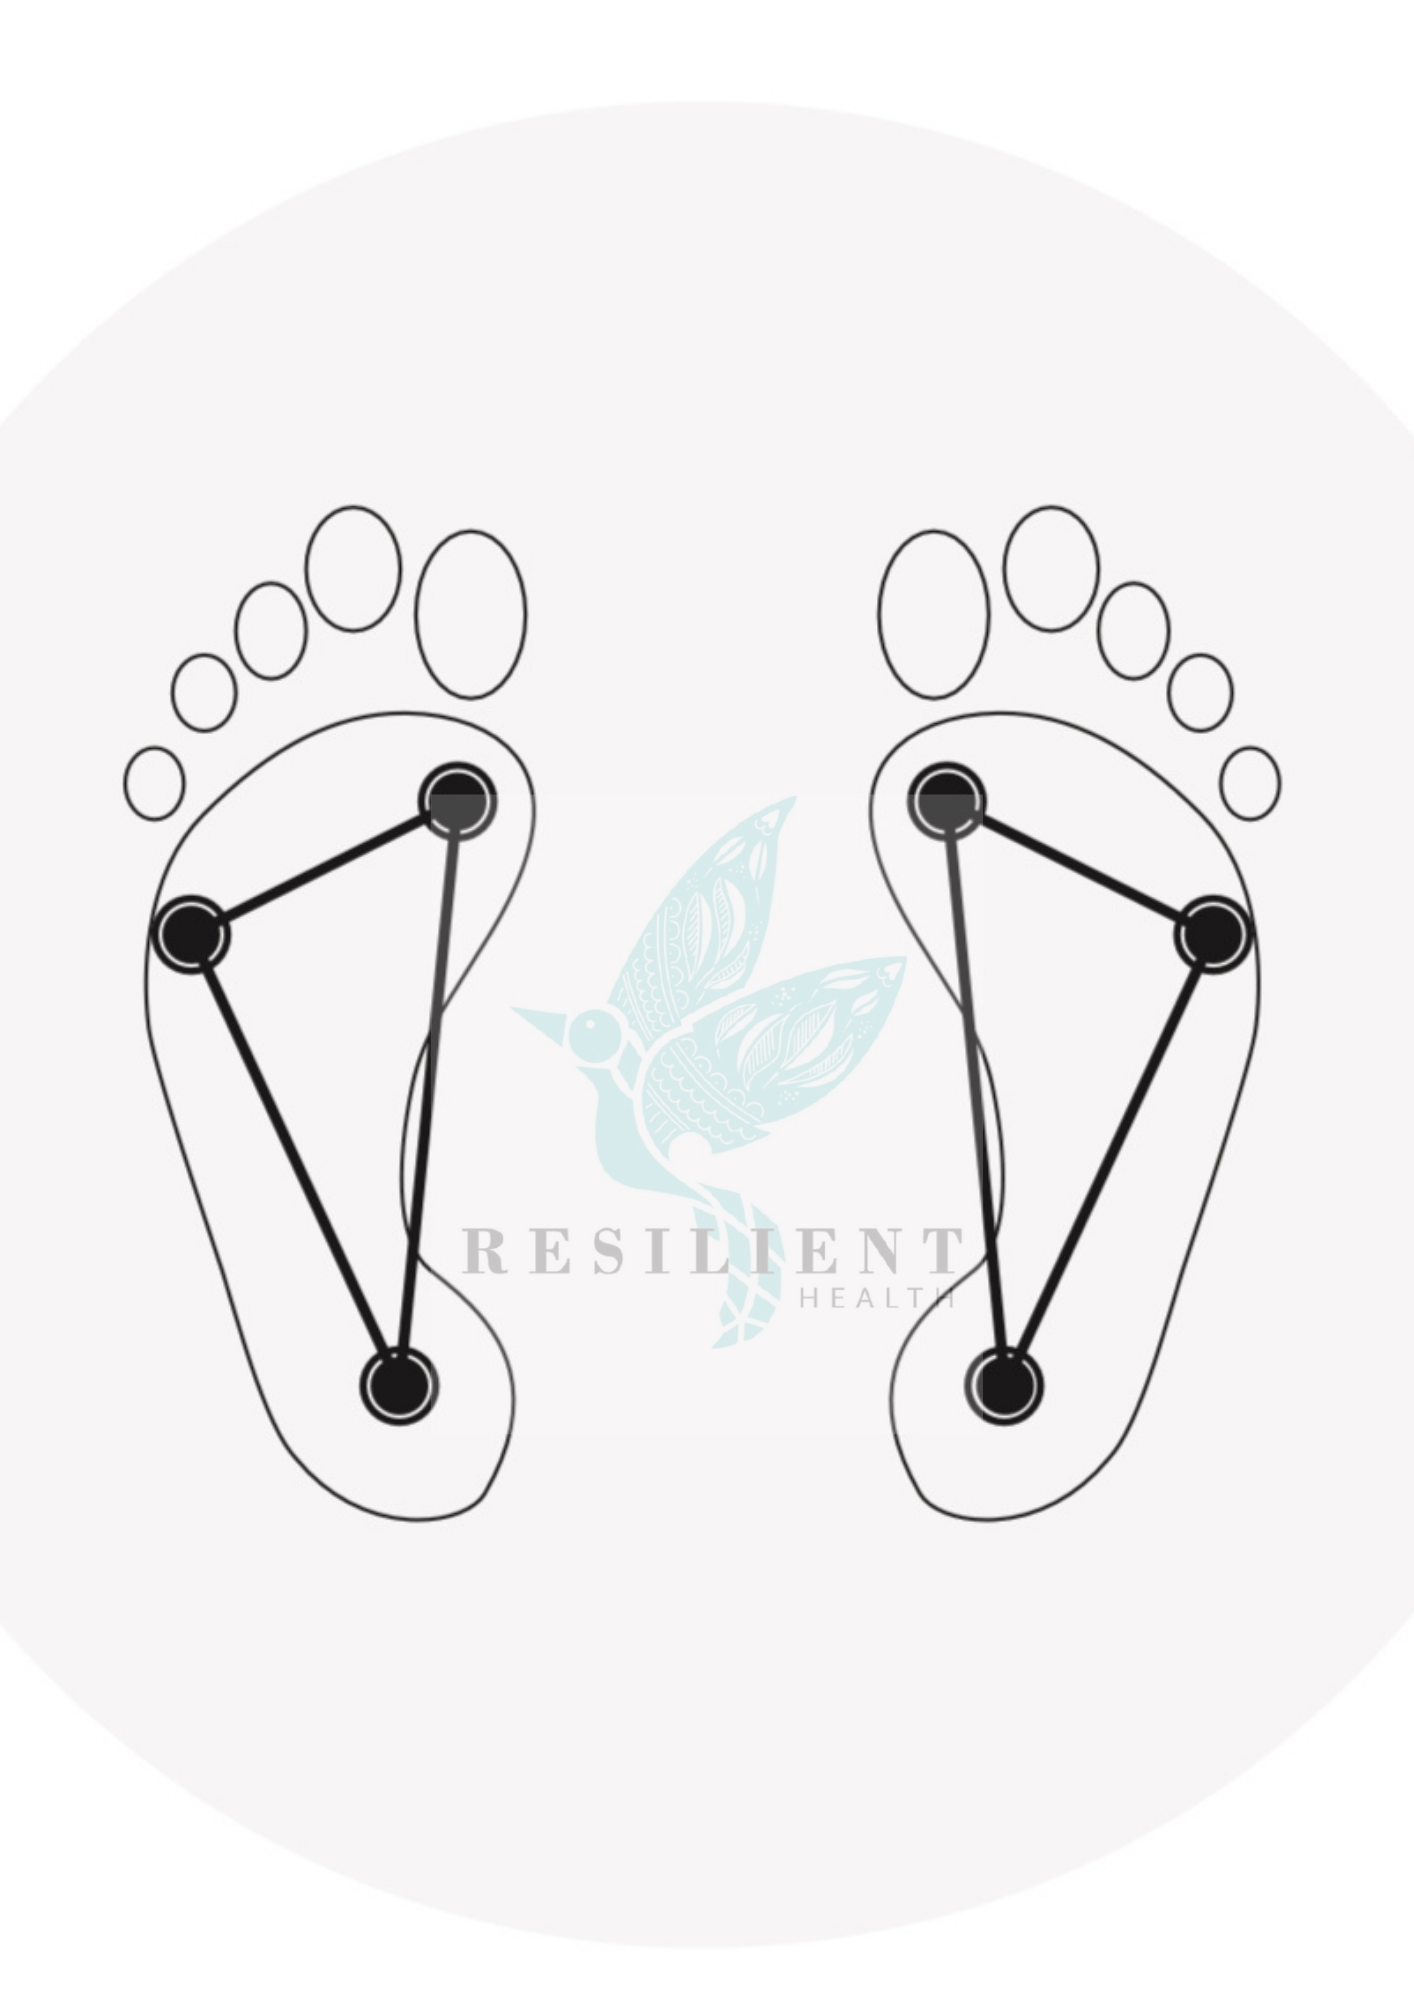 foot tripod resilient health osteopathy sports chiropractic foot pain help